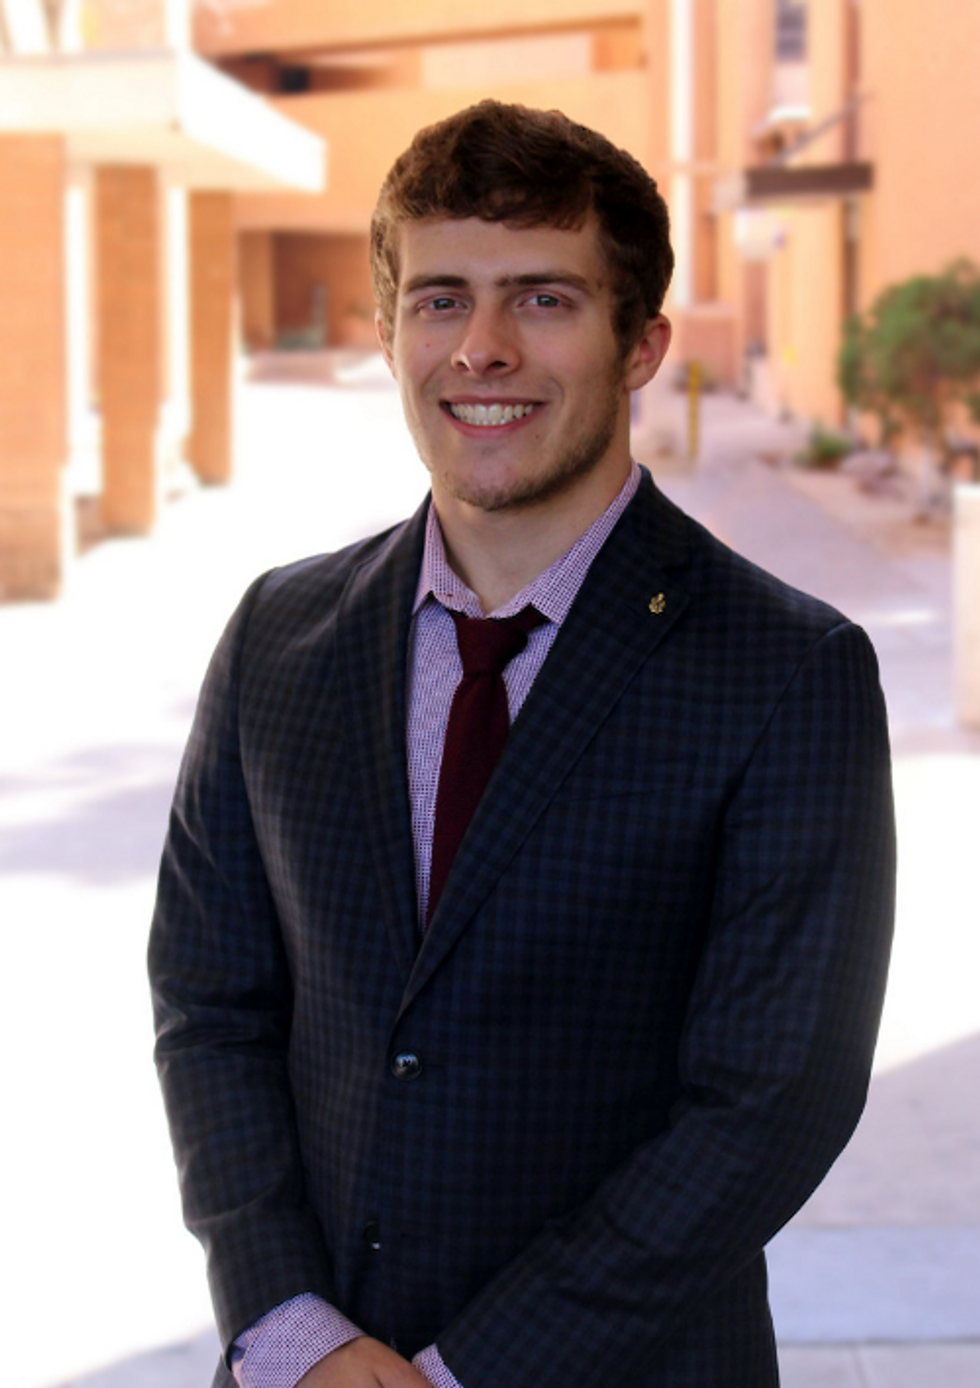 Meet The Reporter: Why Business and Why ASU?